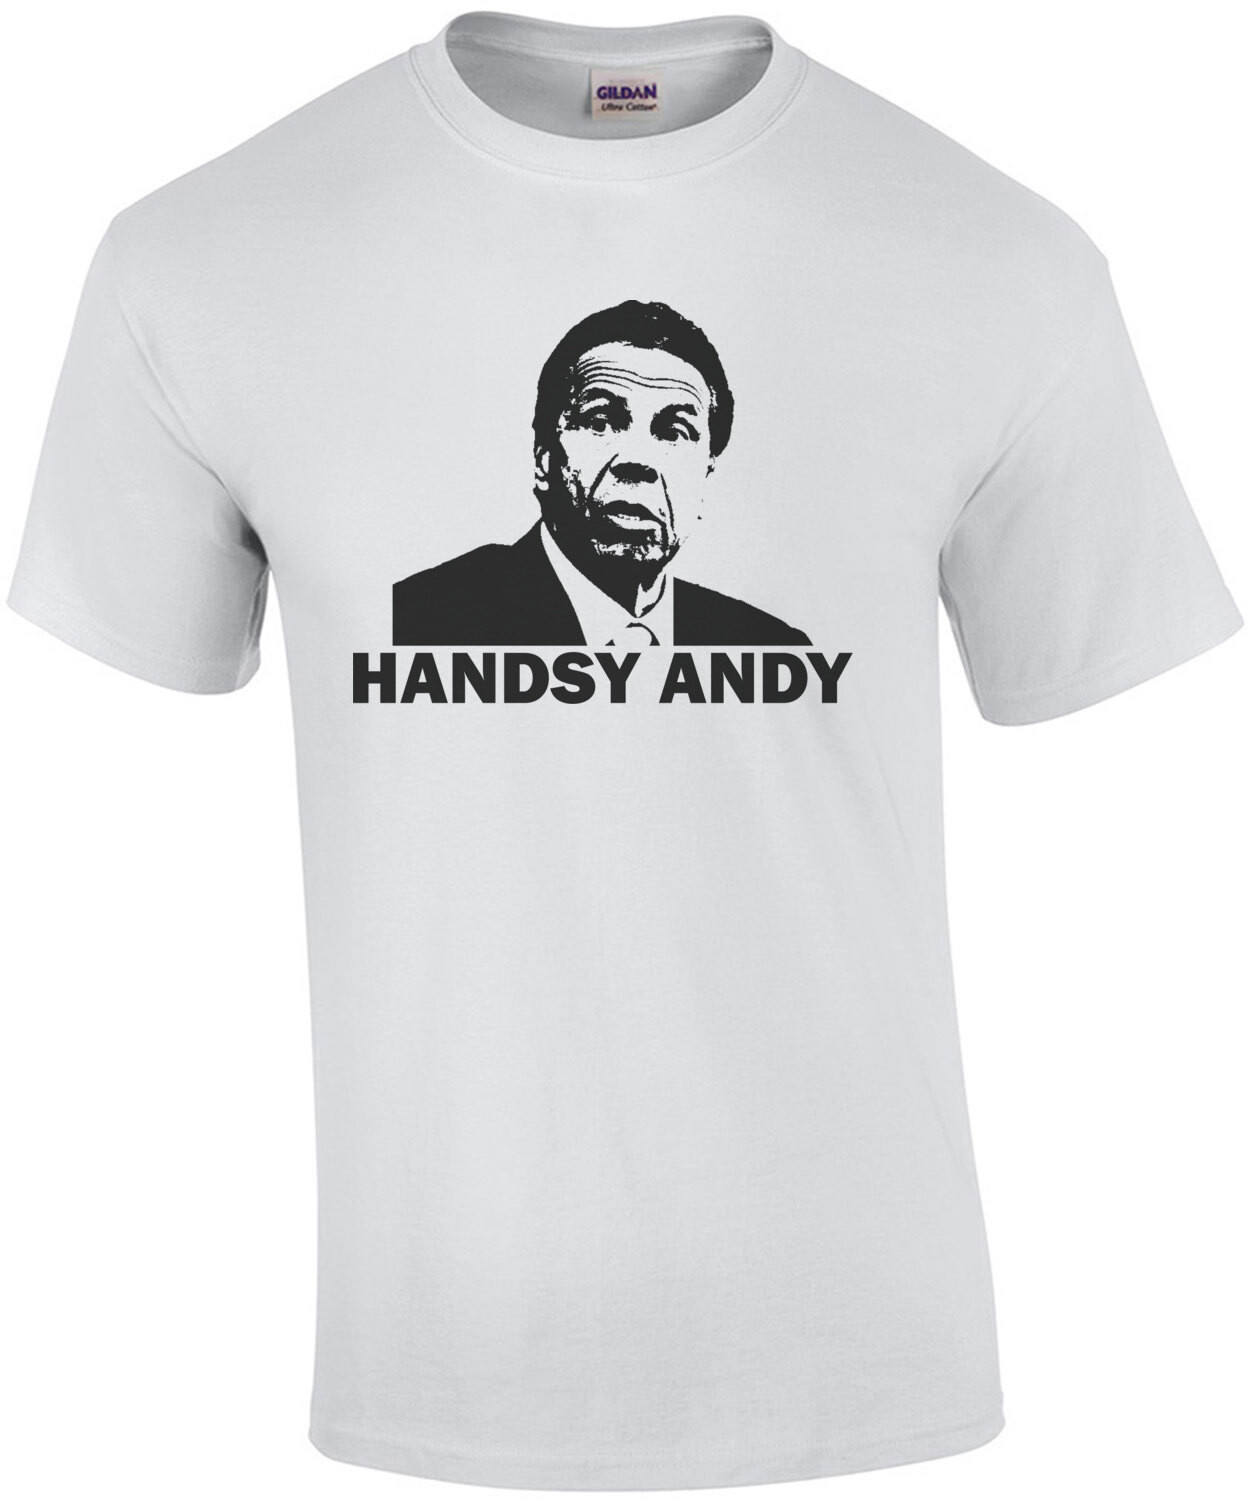 Handsy Andy - Andrew Cuomo Shirt